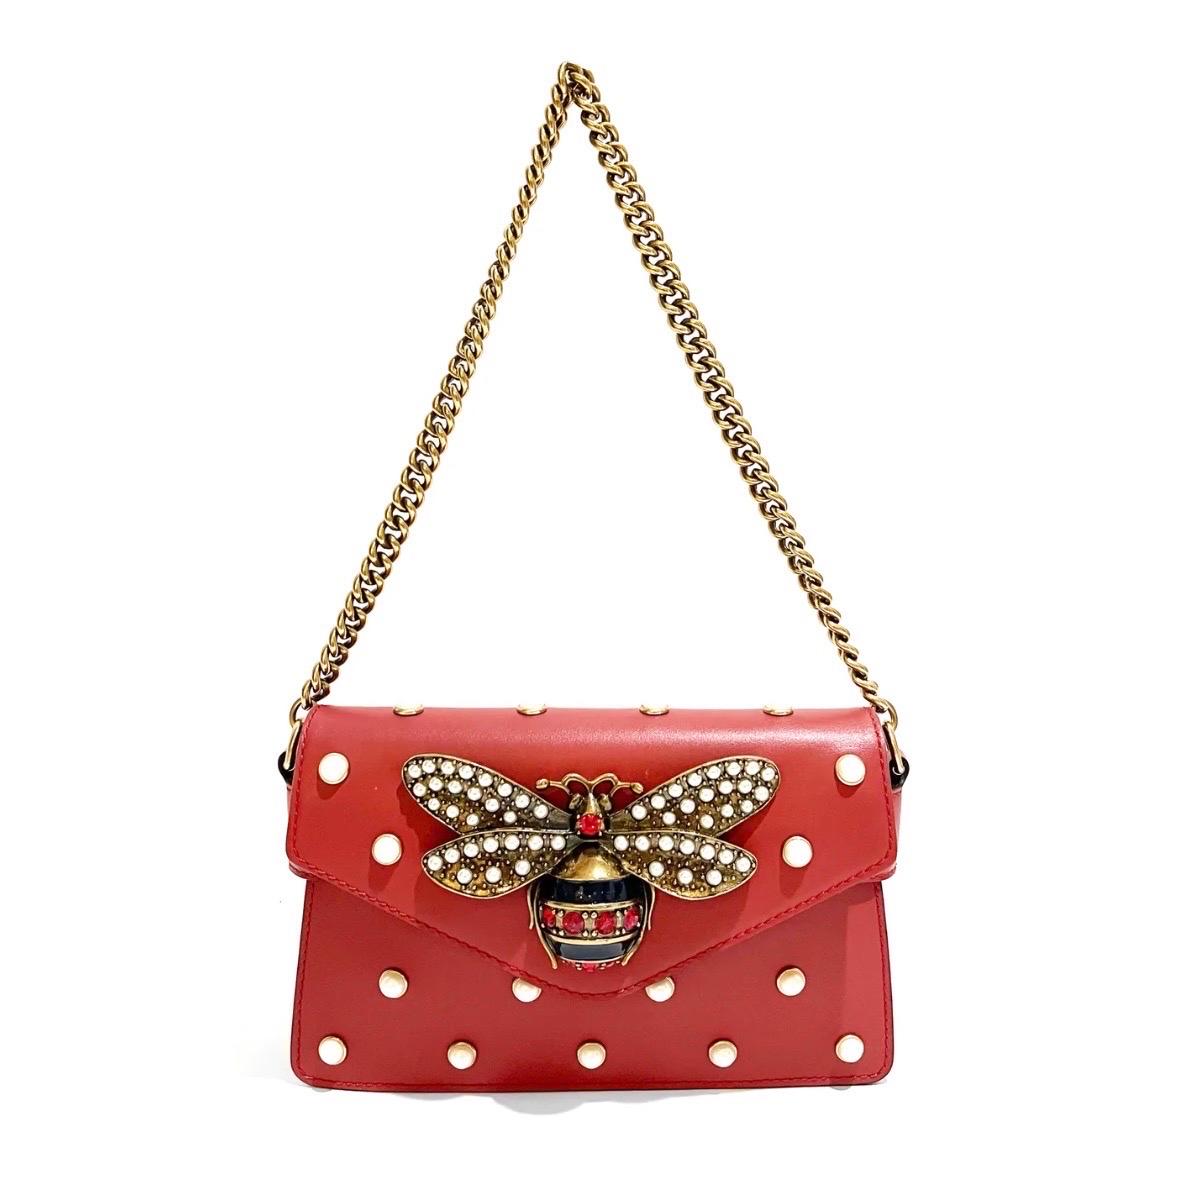 Red Leather Pearl Studded Mini Broadway Bee Envelope Bag by Gucci  
Made in Italy
Red calfskin leather
Large decorative pearl studded bee in front of bag
Bee has red crystals and blue stripe body detail
Pearl studded embellishment throughout